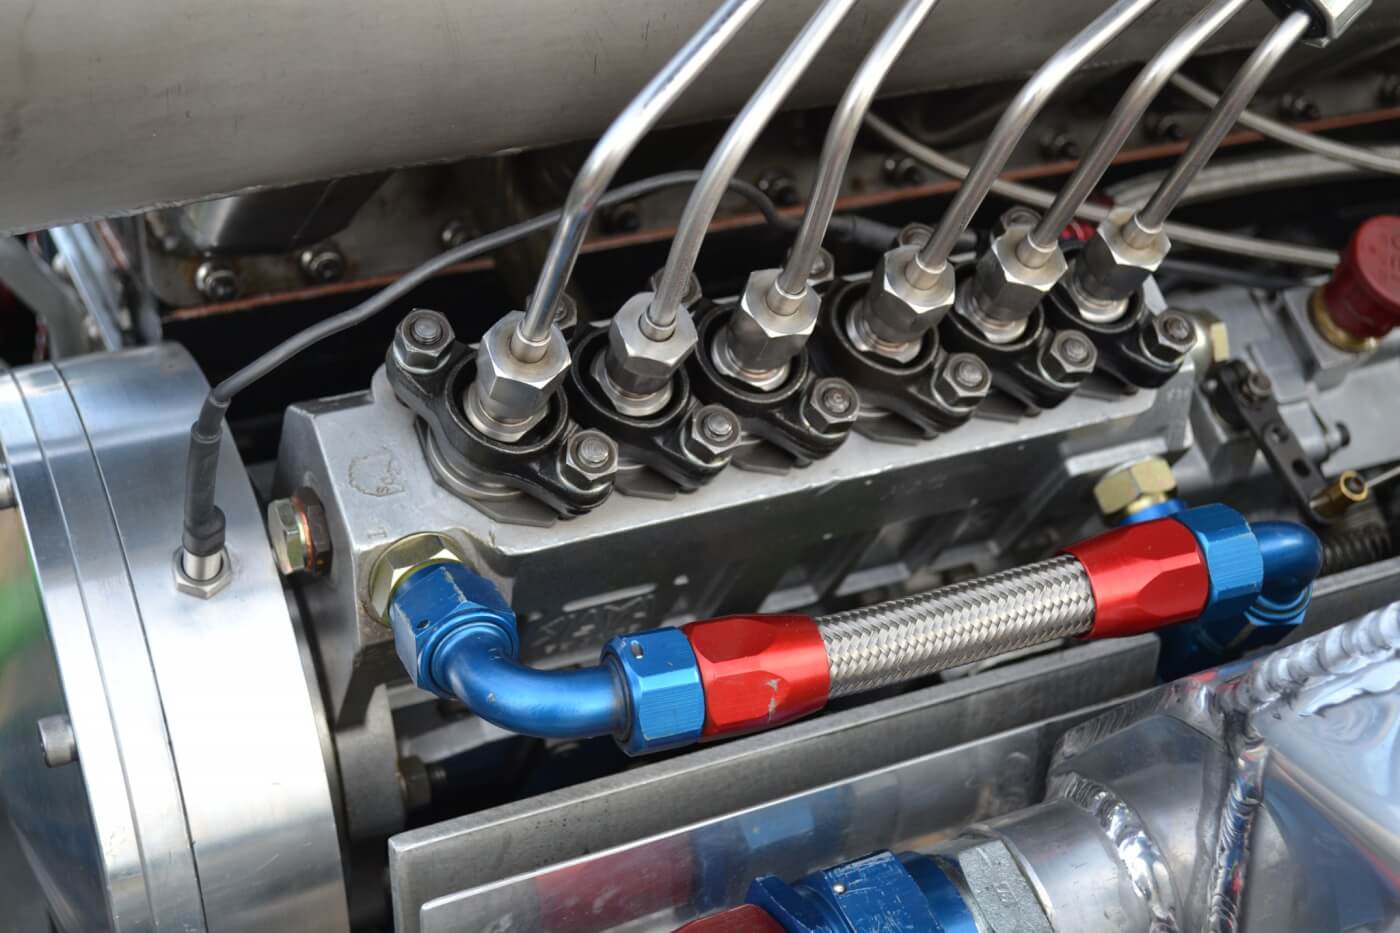 The Cummins' fueling is based around a single piece of equipment; a massive 16mm Sigma injection pump. These types of pumps run upwards of $10,000, and are capable of 3,000-plus horsepower. For maximum power, the pump is set at an incredible 45 degrees of timing.